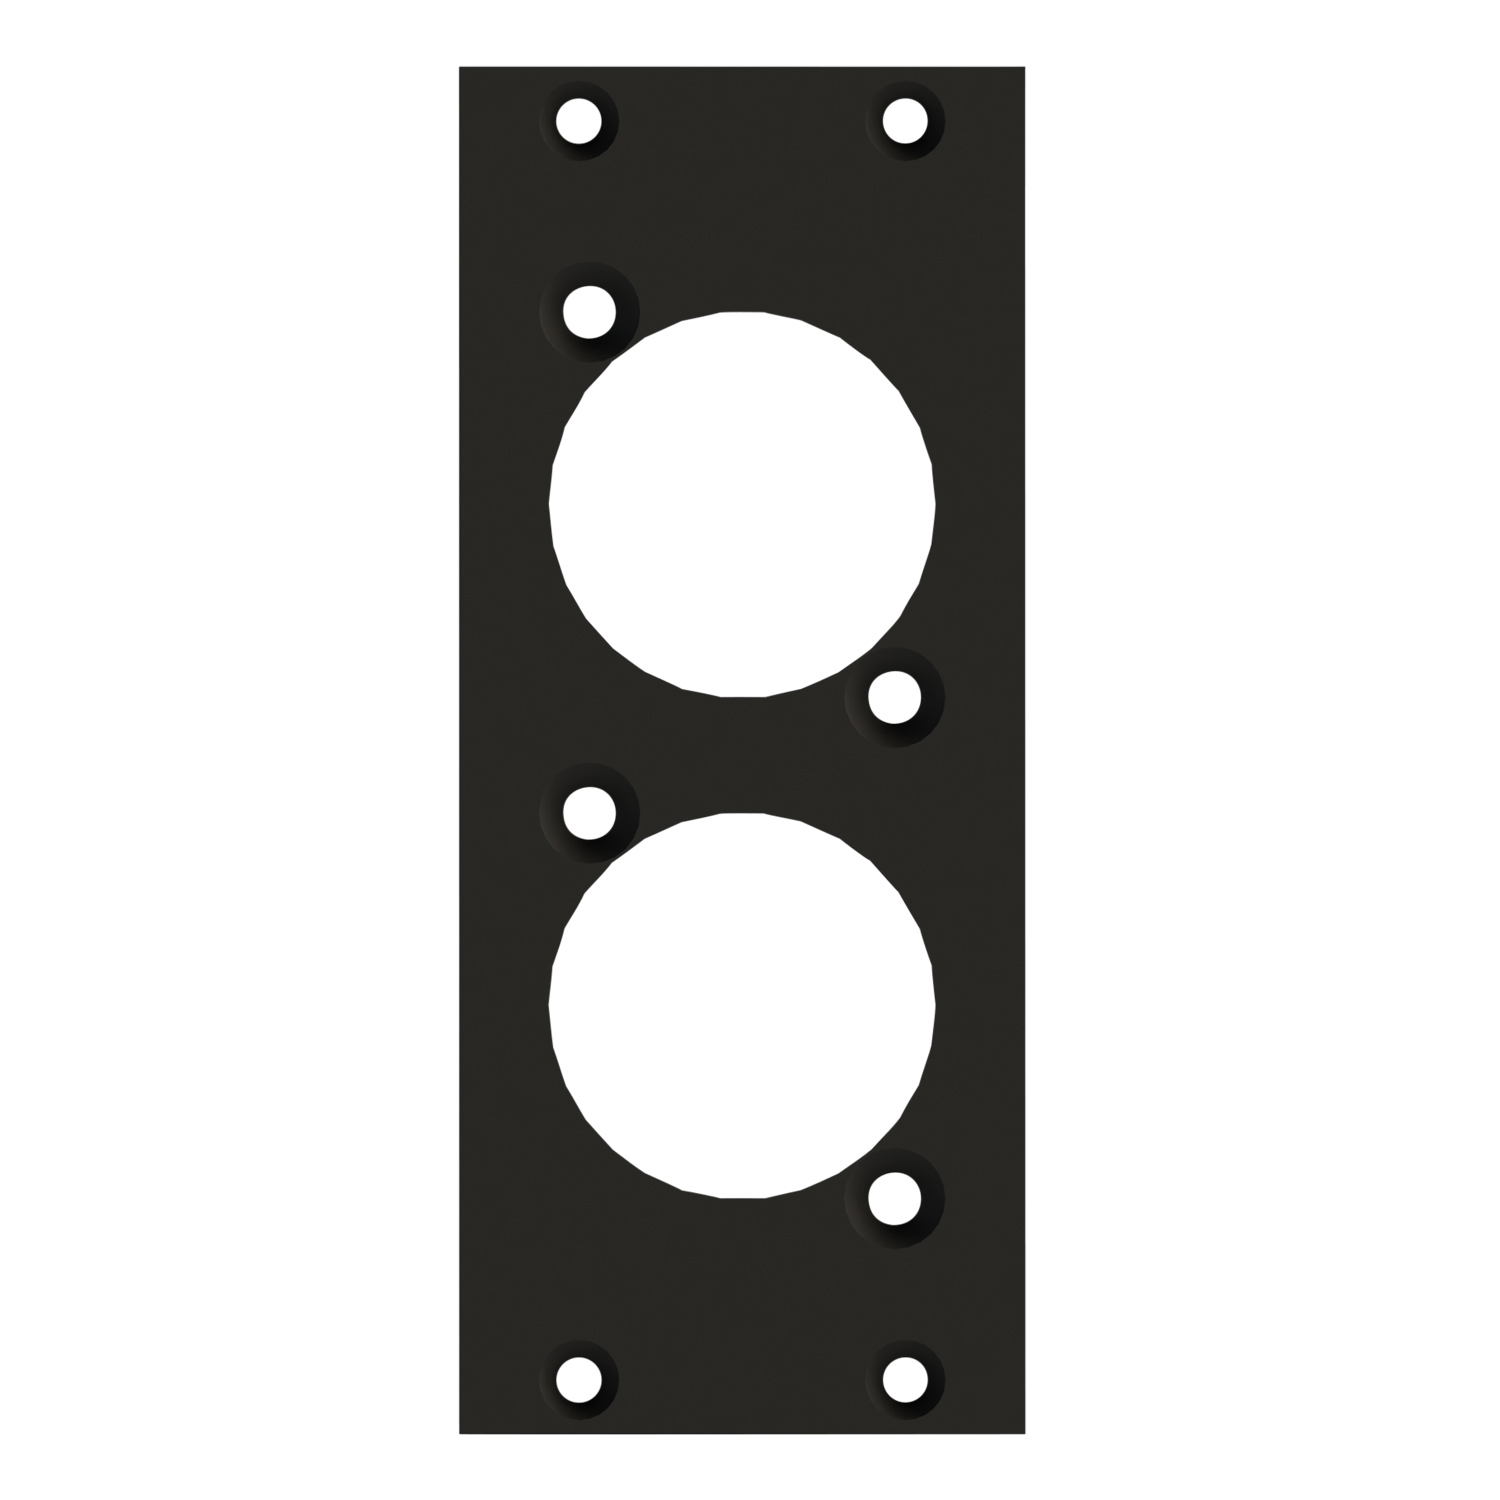 front panel 2 x D-hole, 2 HE, 1 BE for SYS-series, 2.5 mm galvanized steel sheet, colour: grey